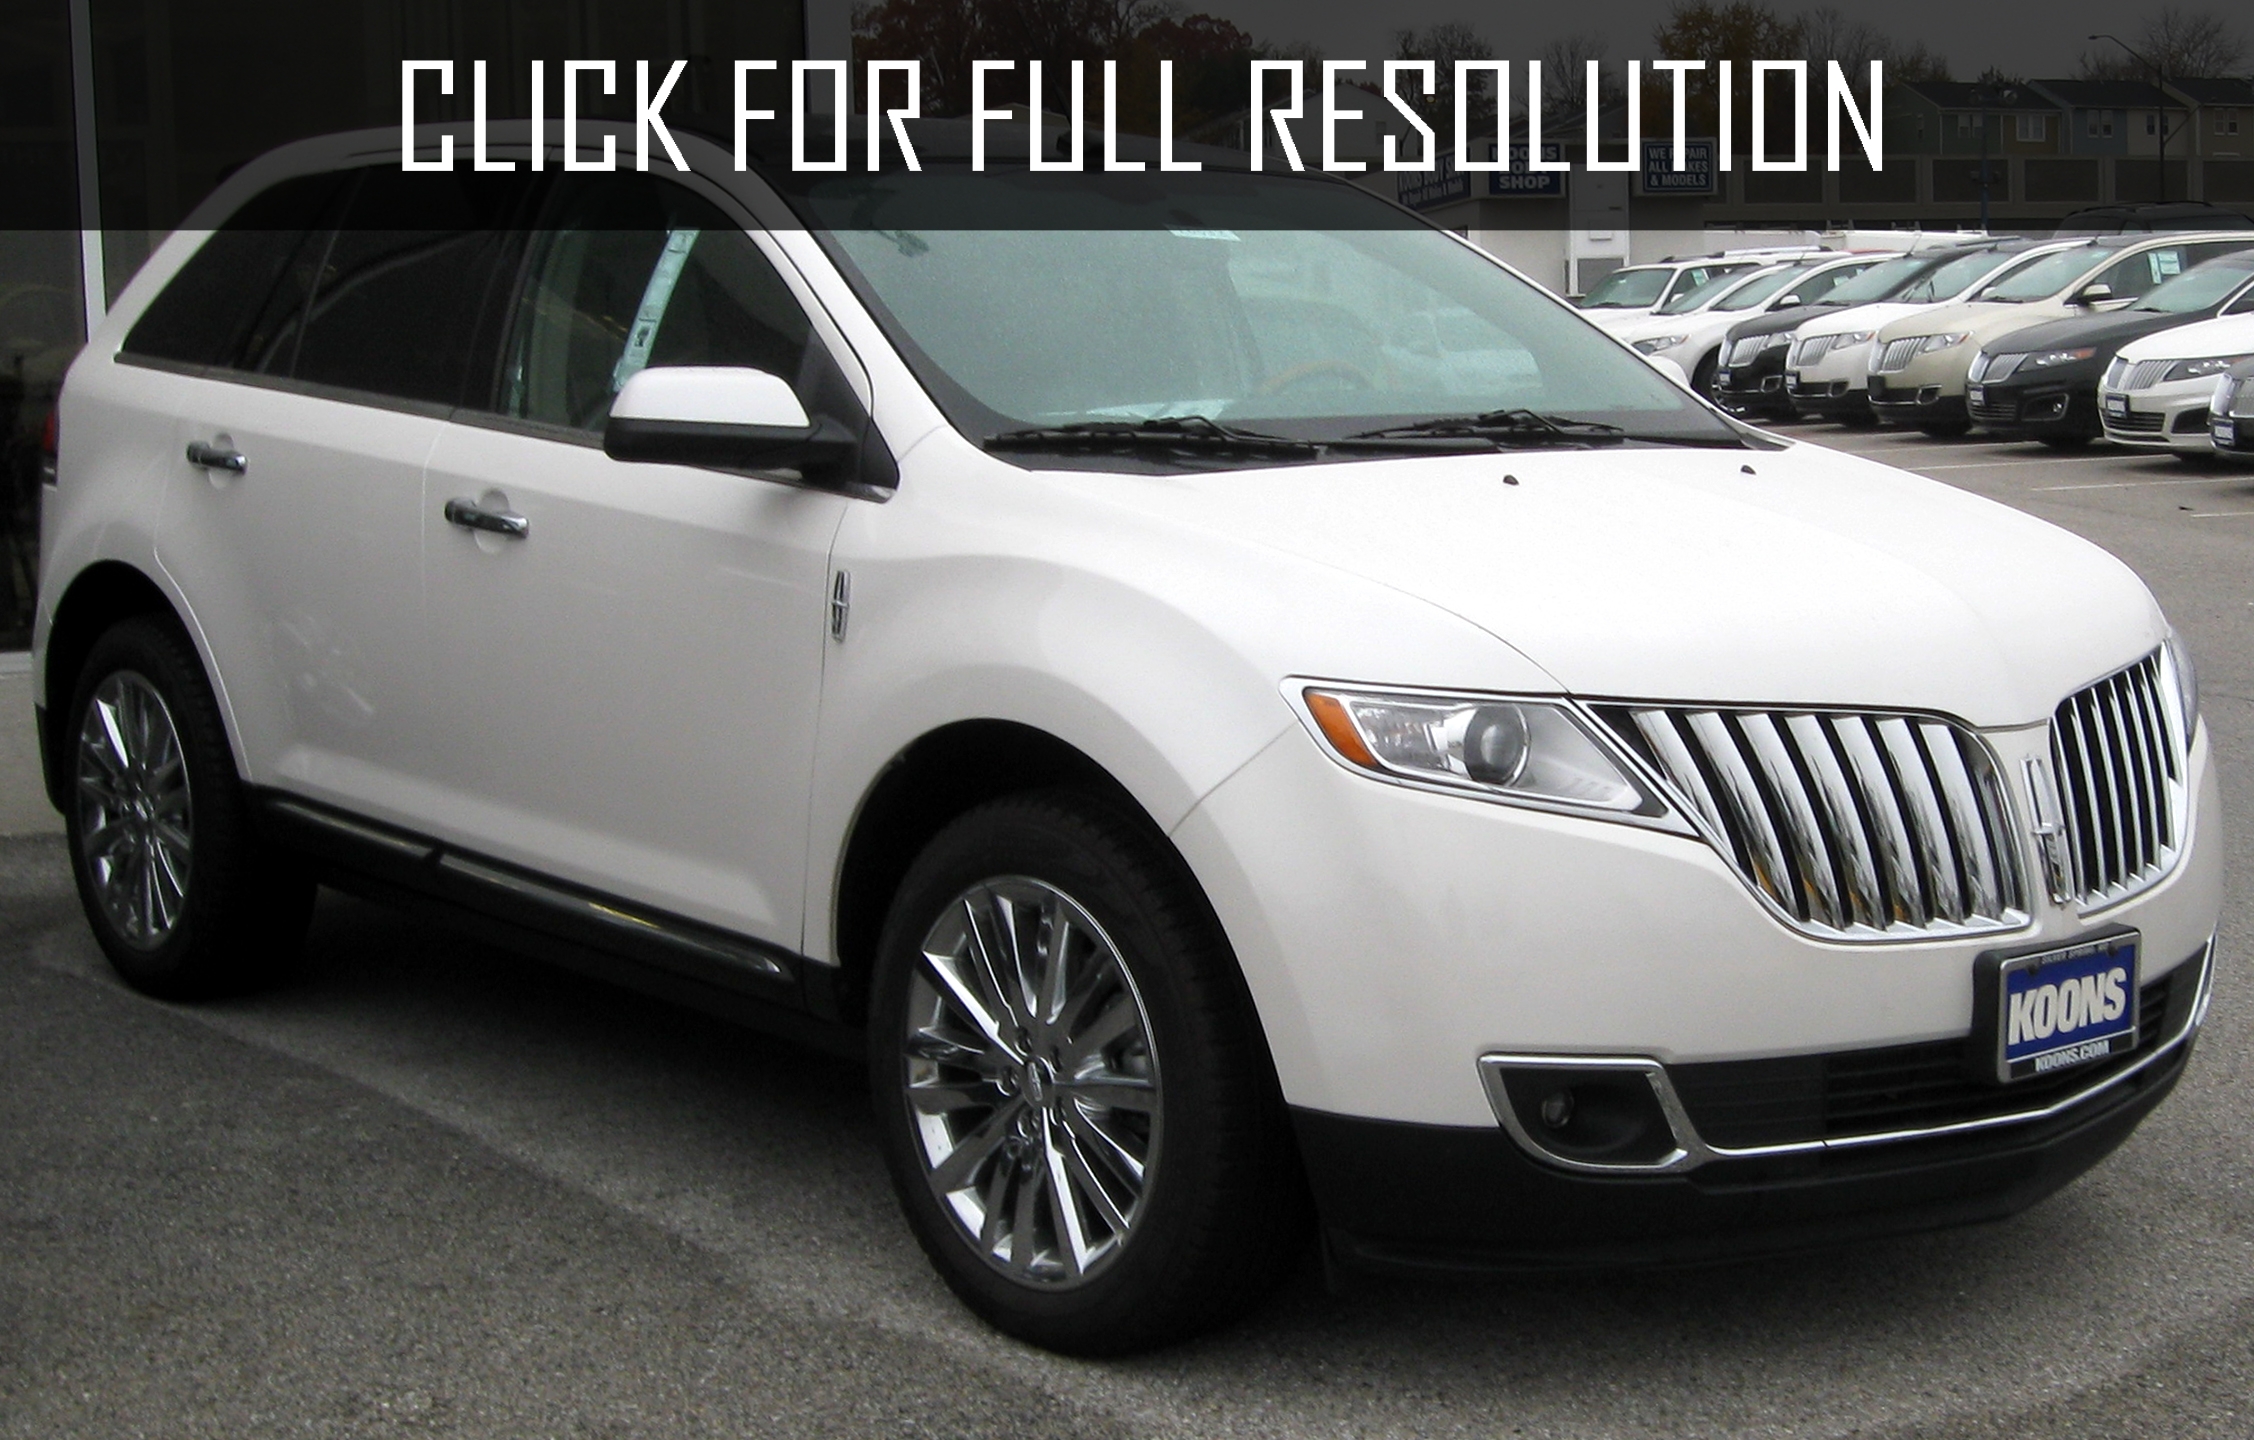 2011 Lincoln Mkx